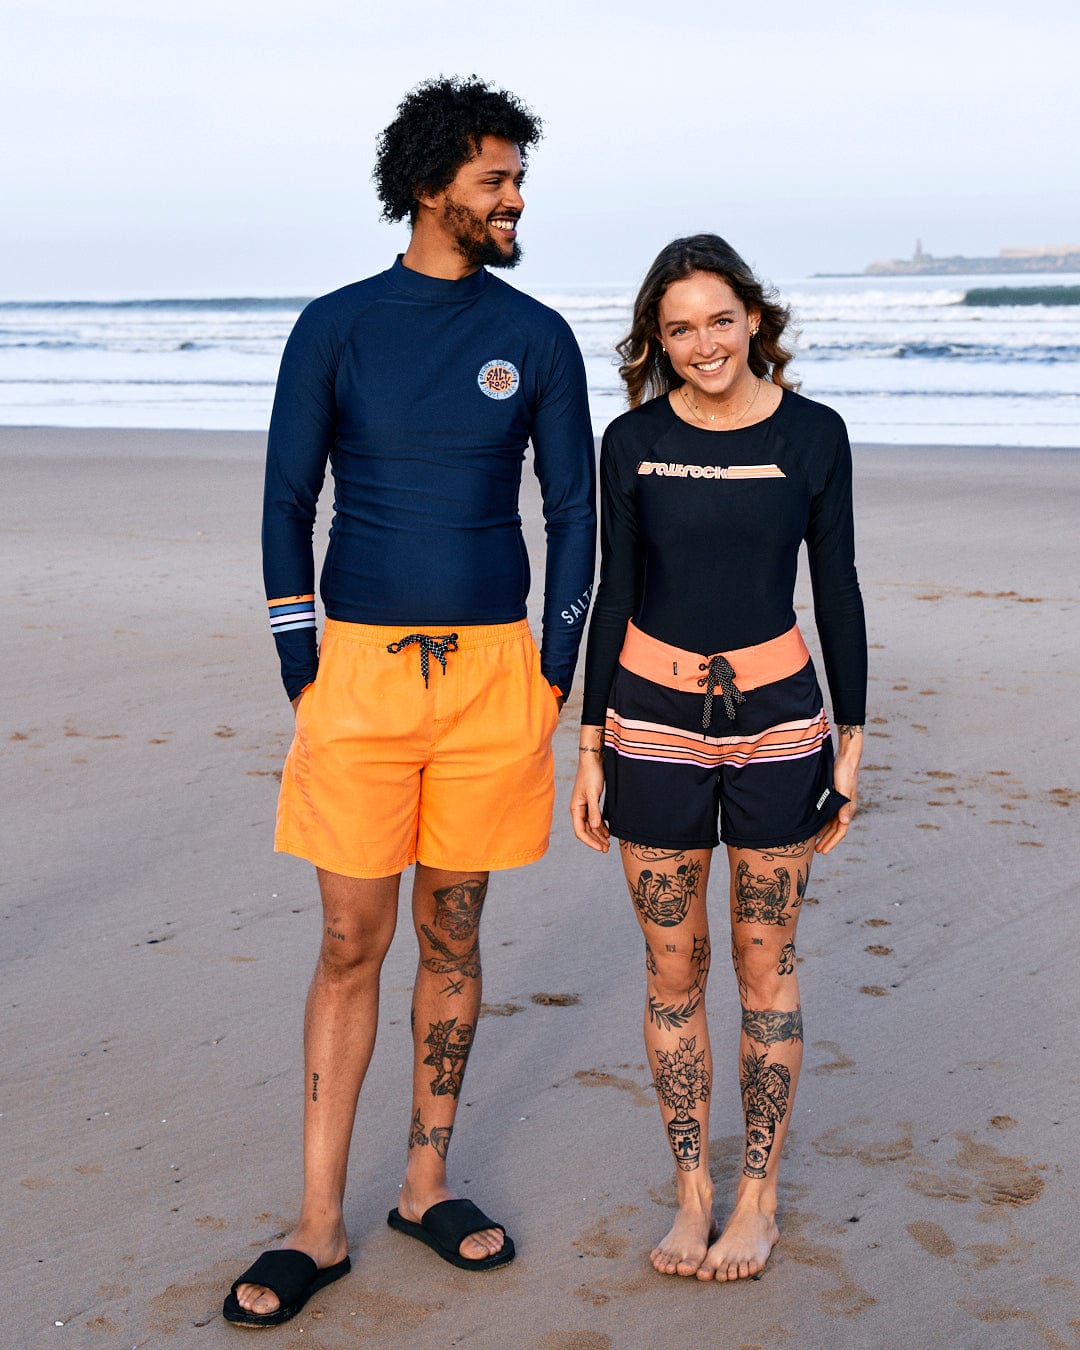 A man and woman smiling on a beach, dressed in Saltrock UPF 50 protection boardshorts and SR Original - Recycled Mens Long Sleeve Rashvest - Blue, with visible tattoos on their legs.